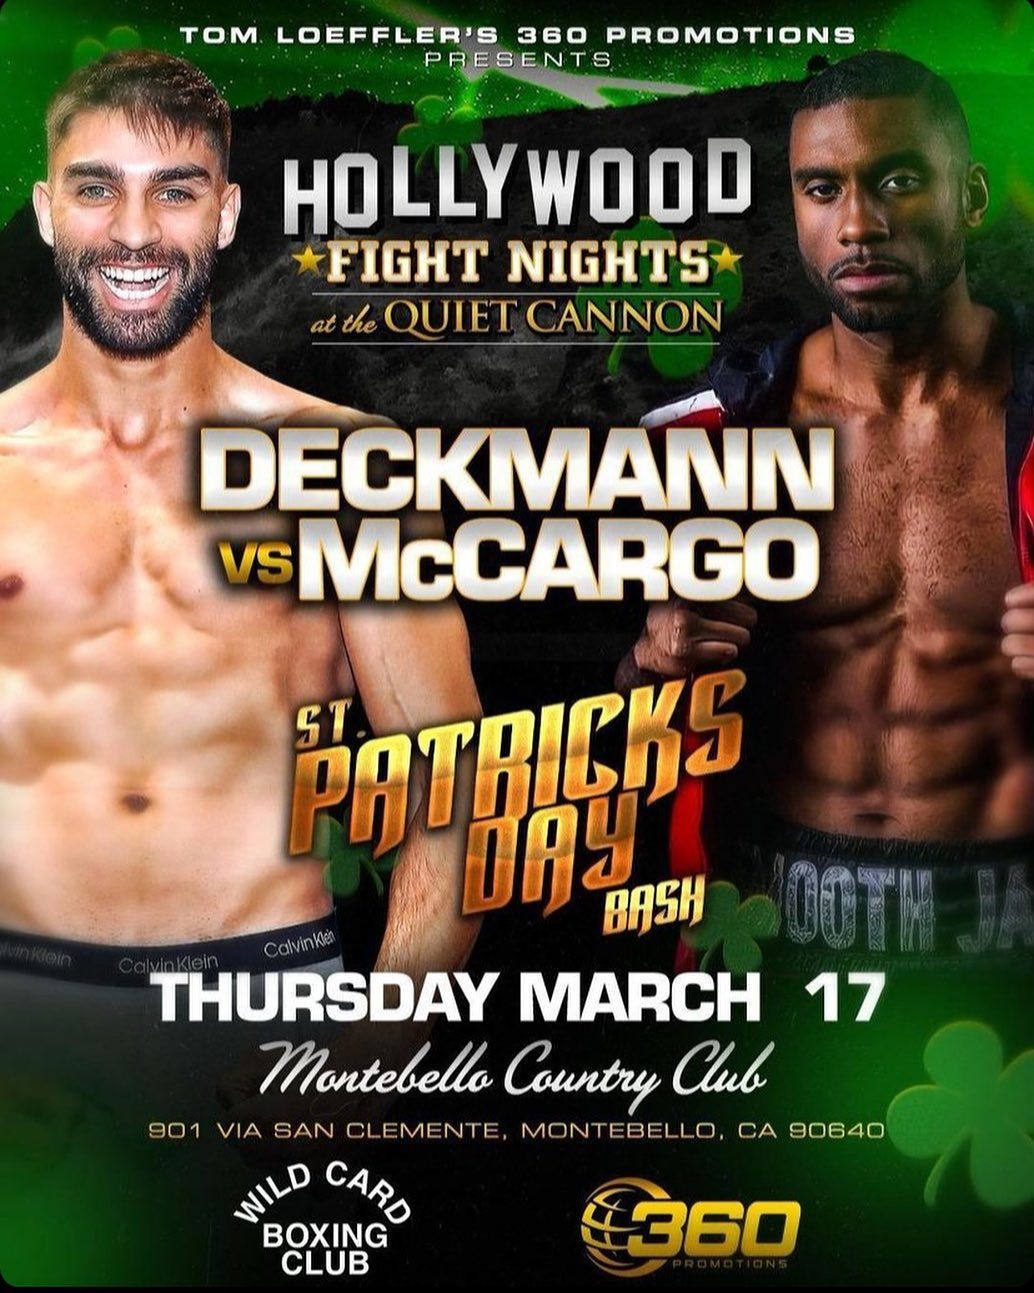 May be an image of 2 people and text that says 'TOM LOEFFLER'S 360 PROMOTIONS PRESENTS HOLLYWOOD FIGHT NIGHTS QUIET CANNON DECKMANN VS McCARGO PATRICKS DAY BASH calvink THURSDAY MARCH 17 Montebello Country Club 901 VIA SAN CLEMENTE, MONTEBELLO, CA 90640 WILD CARD BOXING CLUB 360'